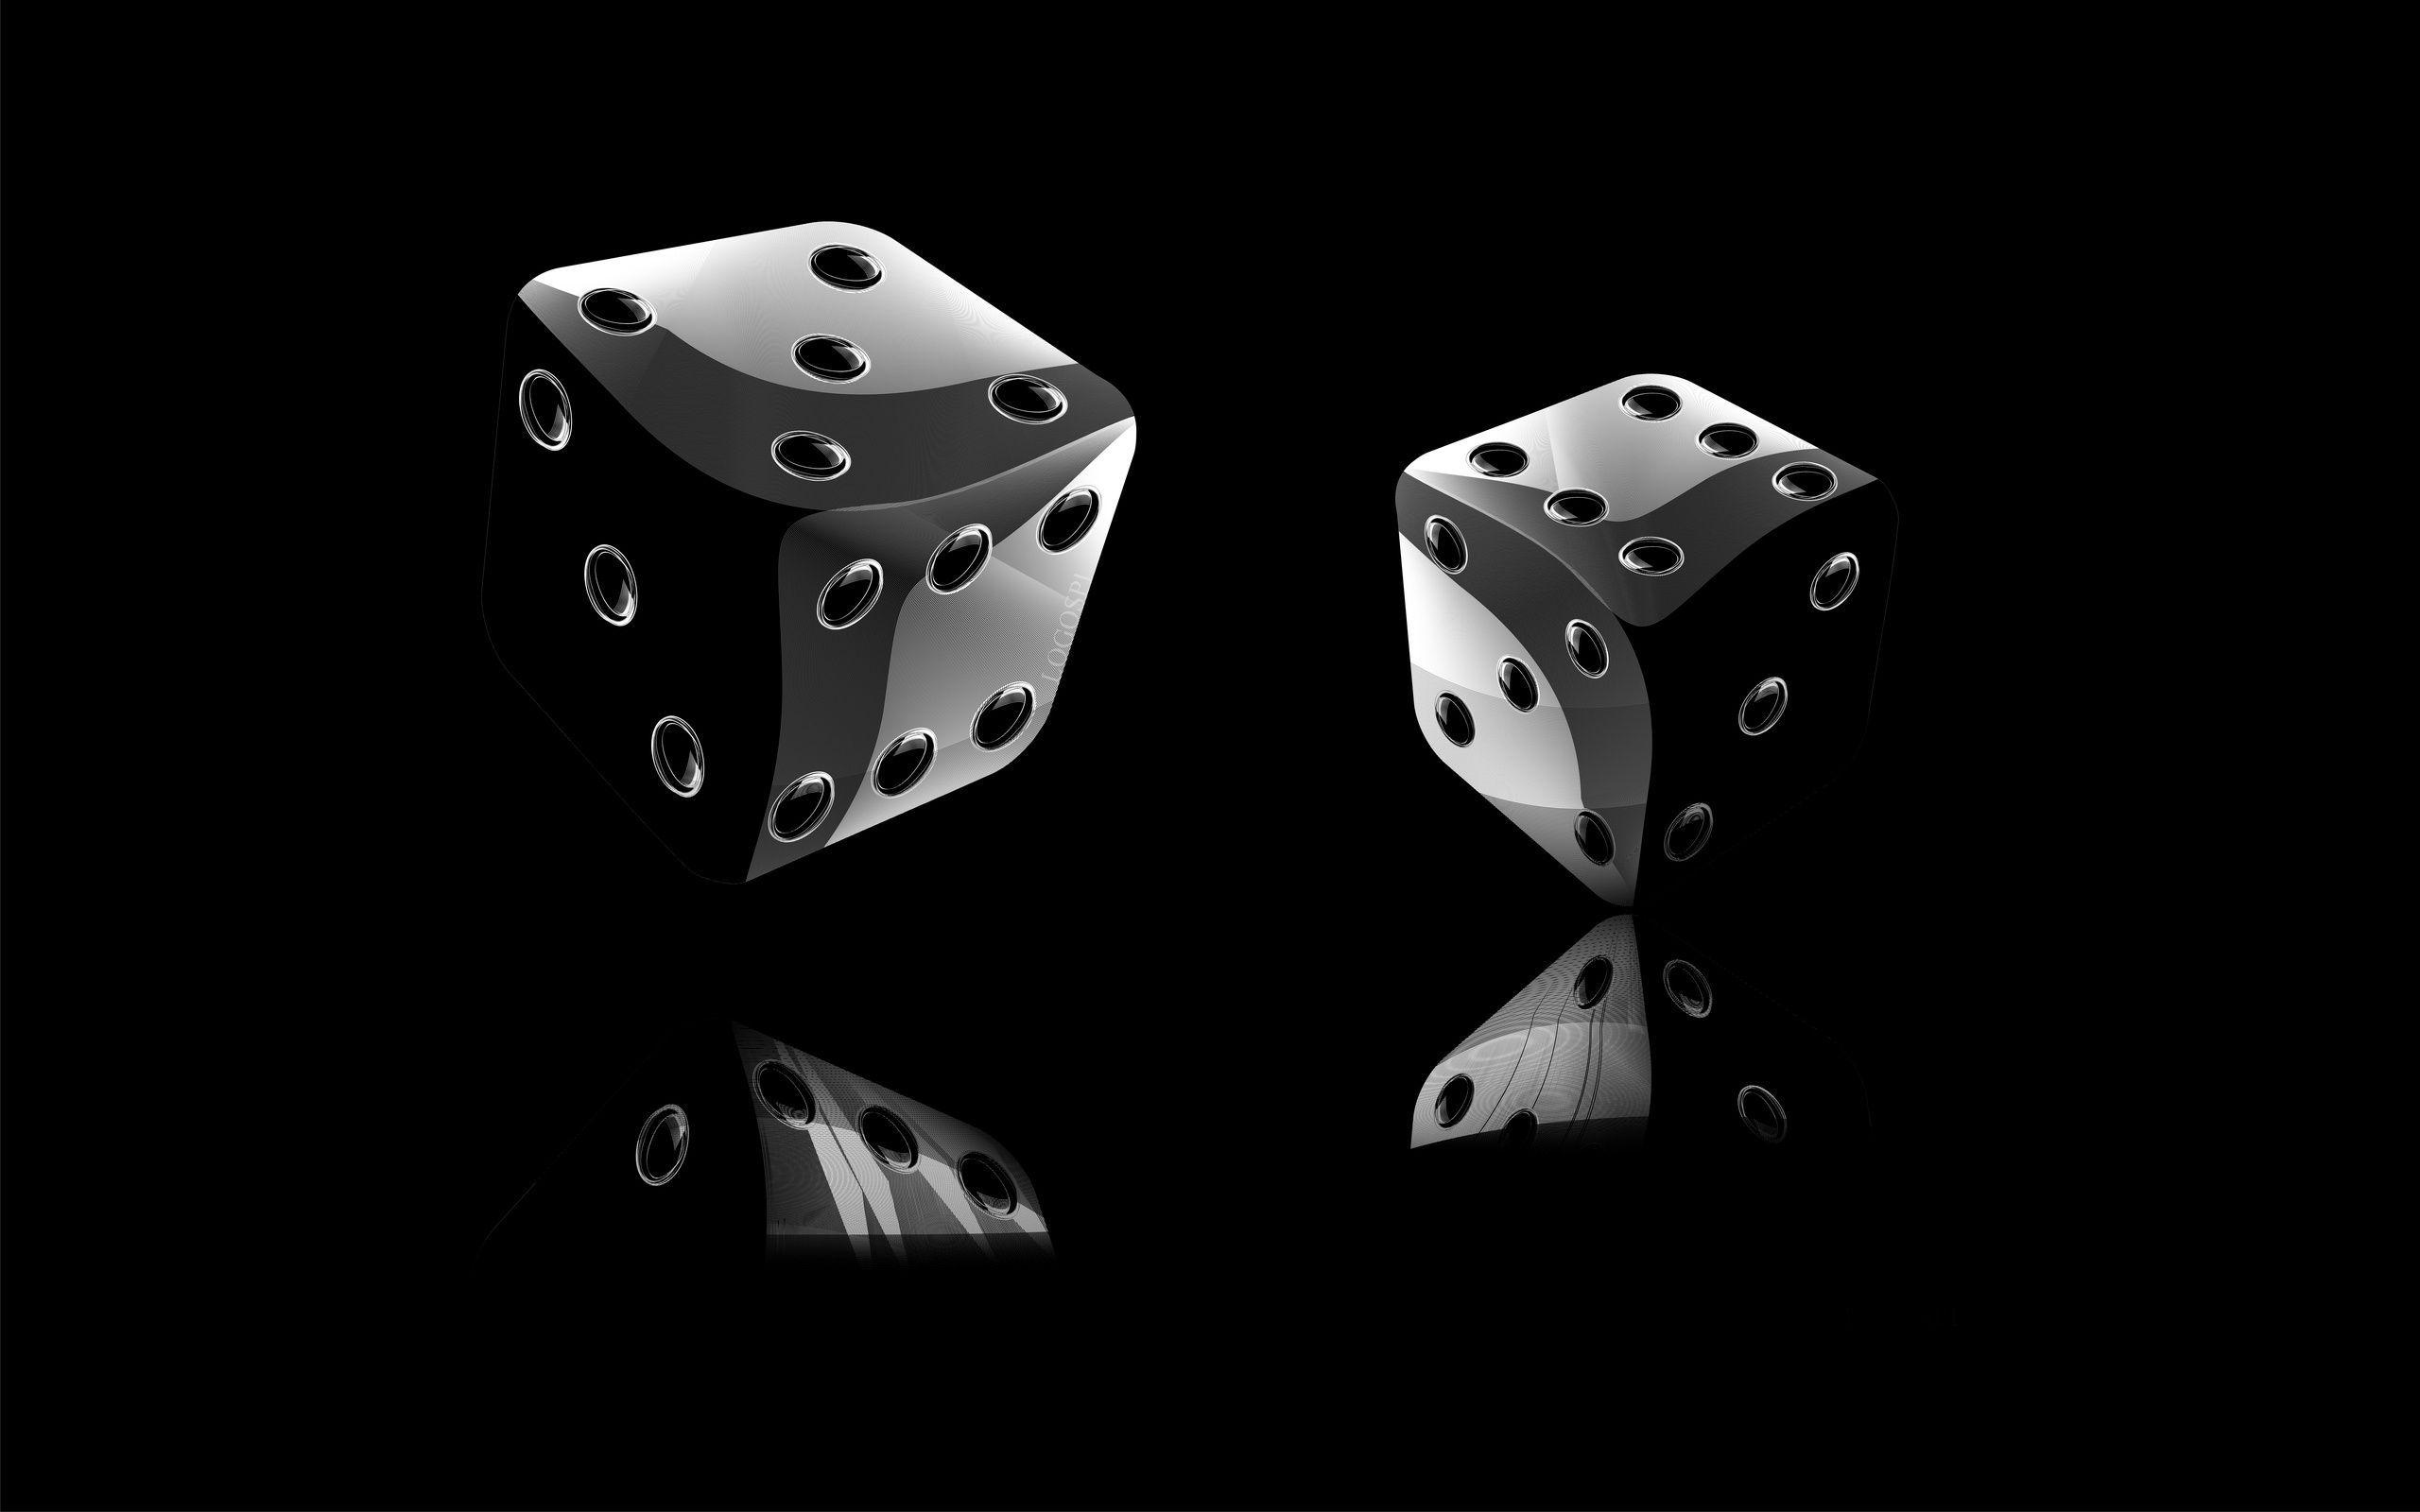 Dice Wallpaper 75 pictures